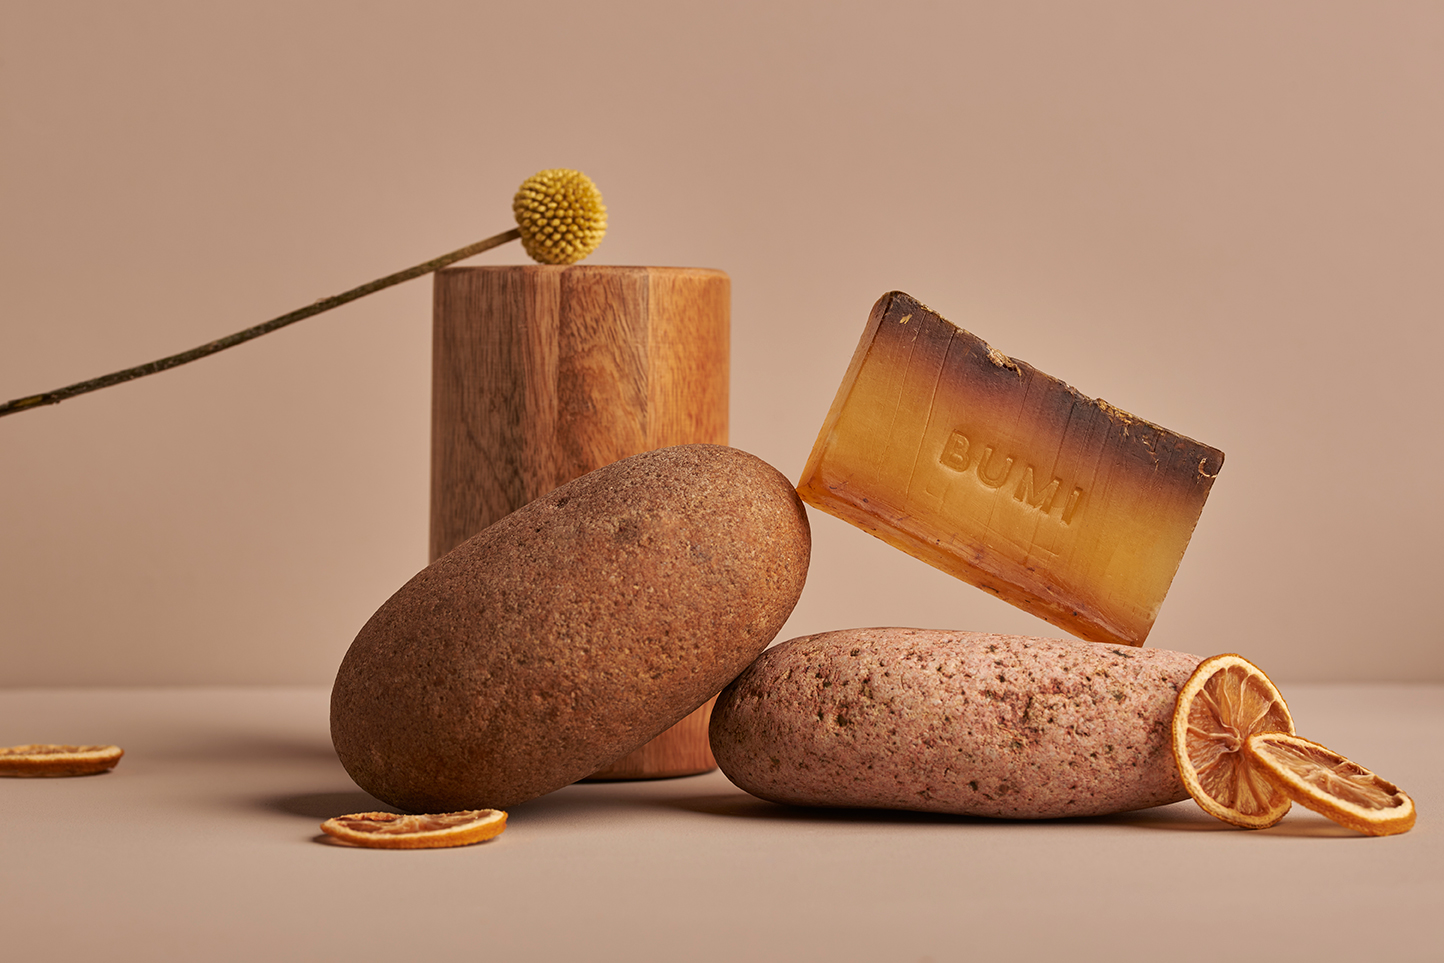 Soap Bar placed on rocks and wood with citrus around it.